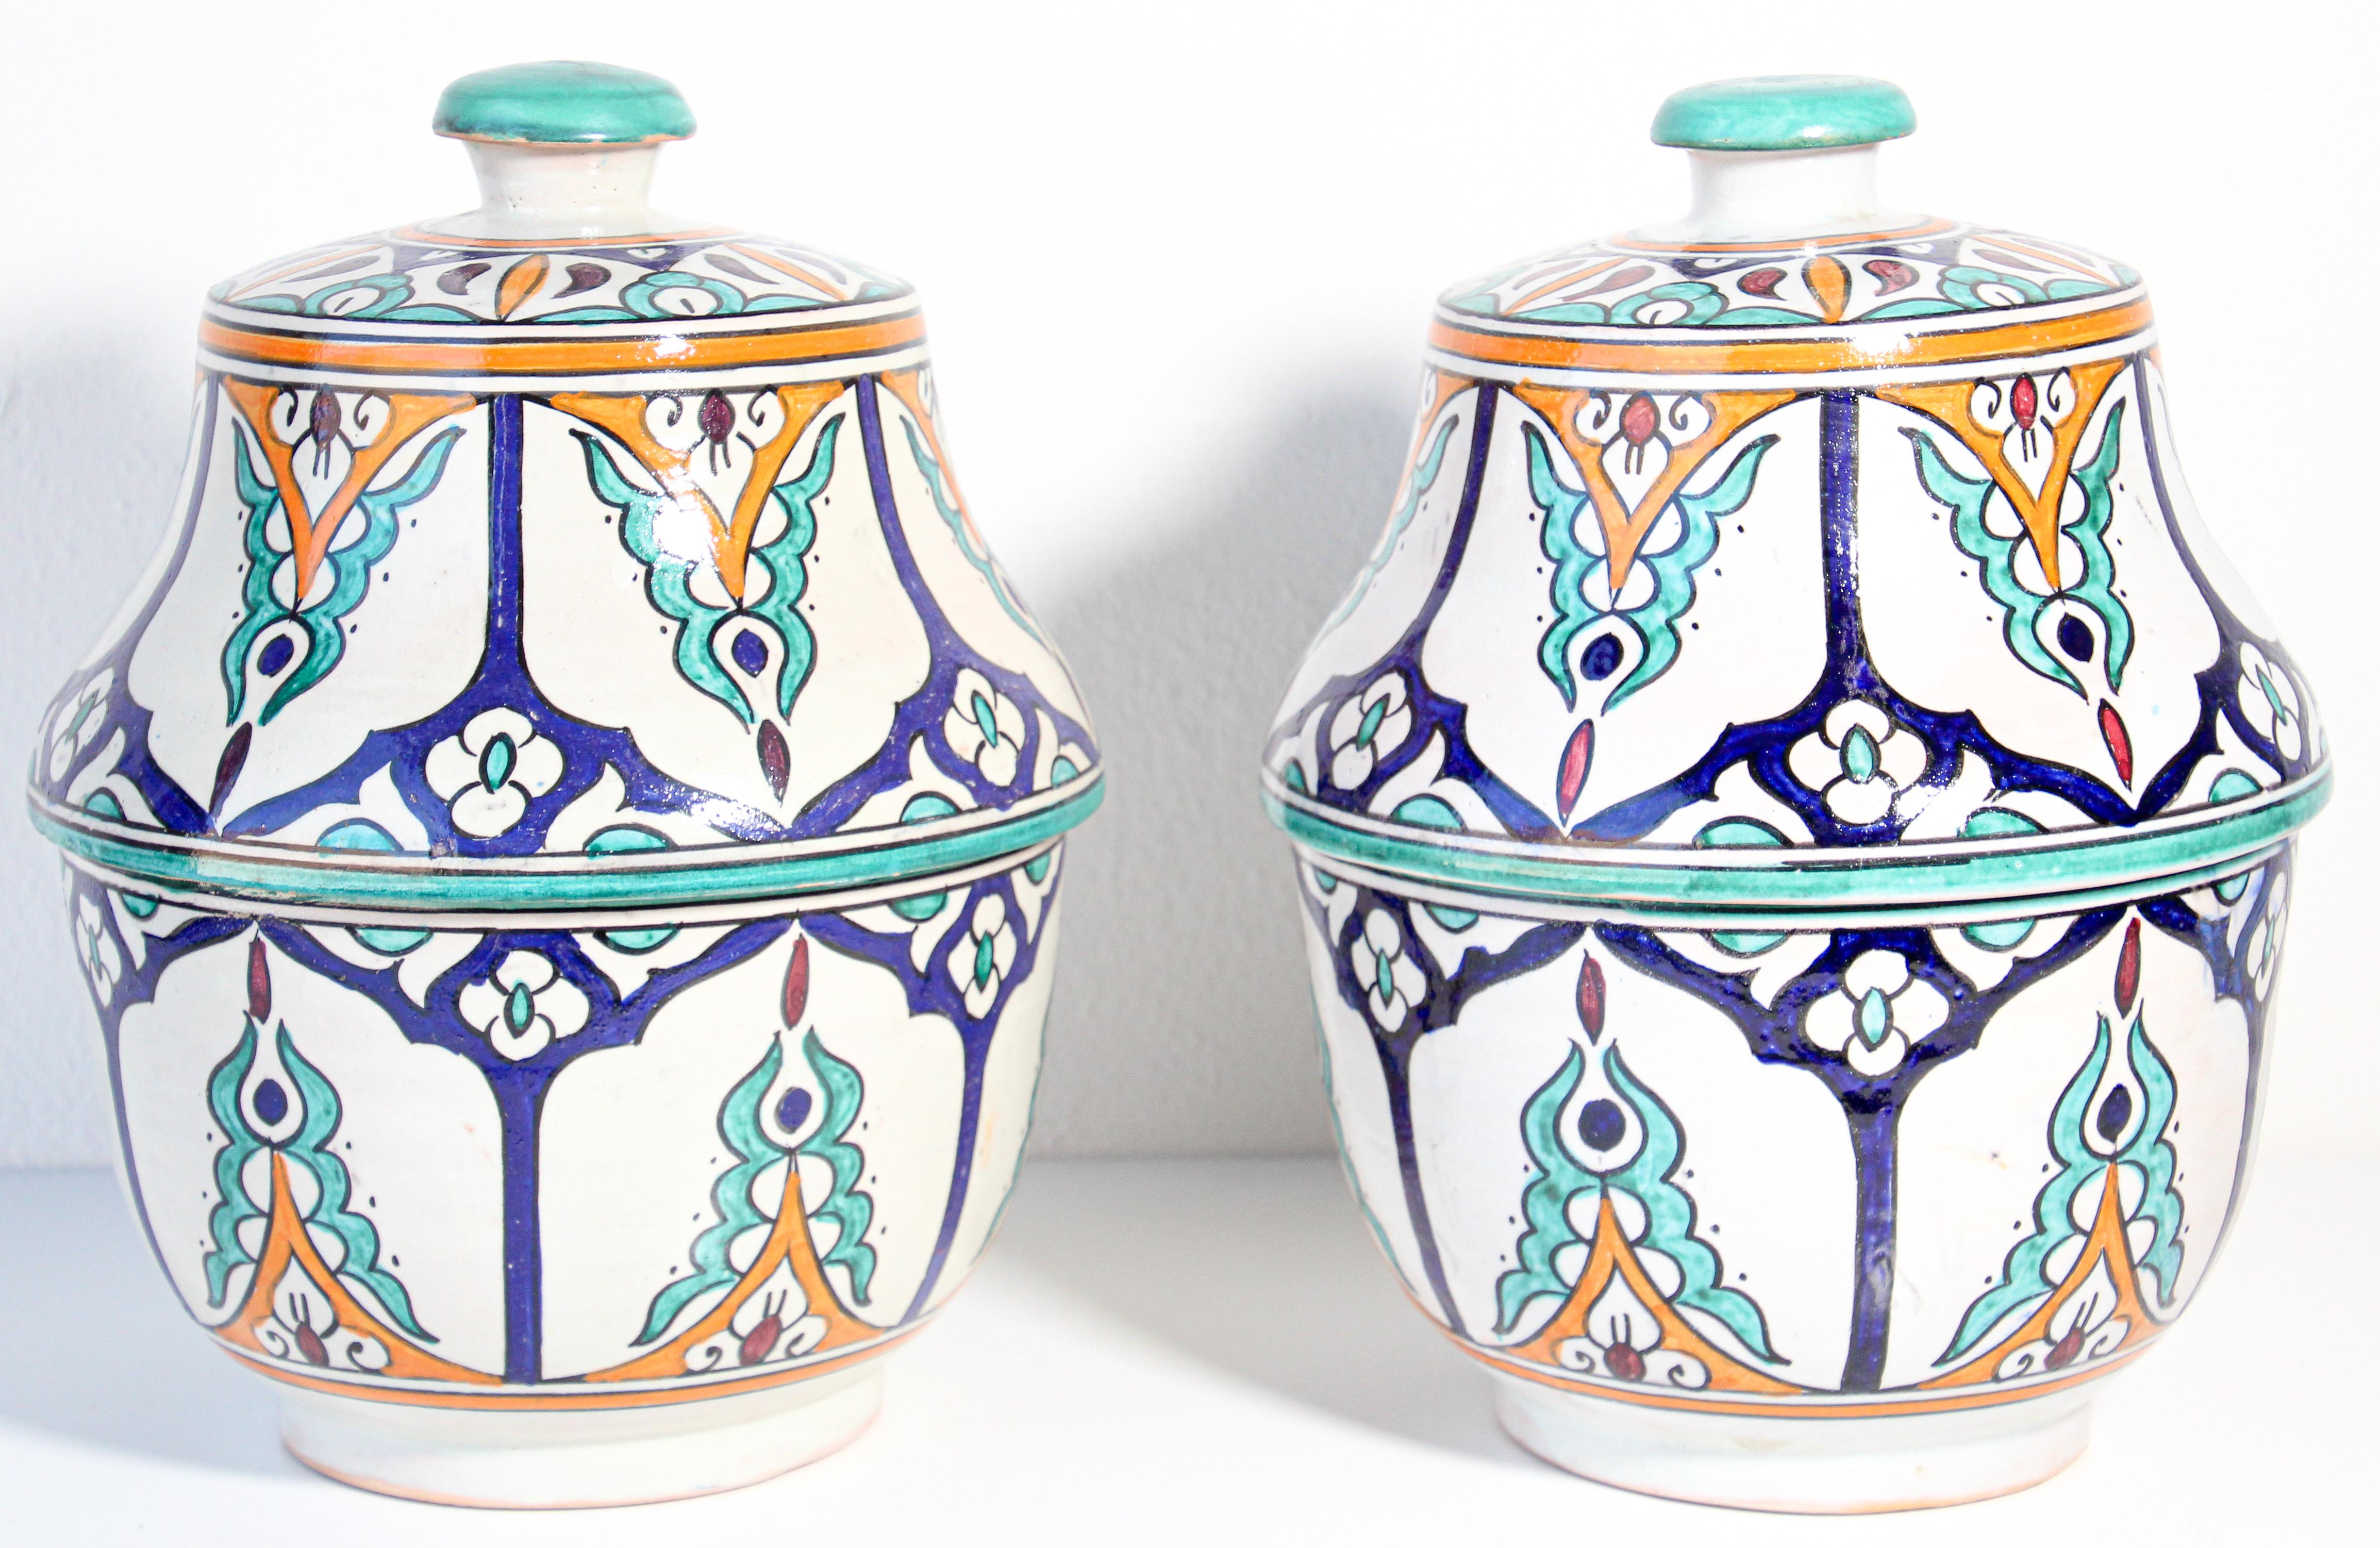 Large pair of Moroccan glazed polychrome ceramic jars tureen with cover.
Hand painted ceramic Jubbana, handcrafted by skilled Moroccan artisans in Fez Morocco.
Moorish designs in turquoise, cobalt blue, teal, saffron yellow, prune and ivory